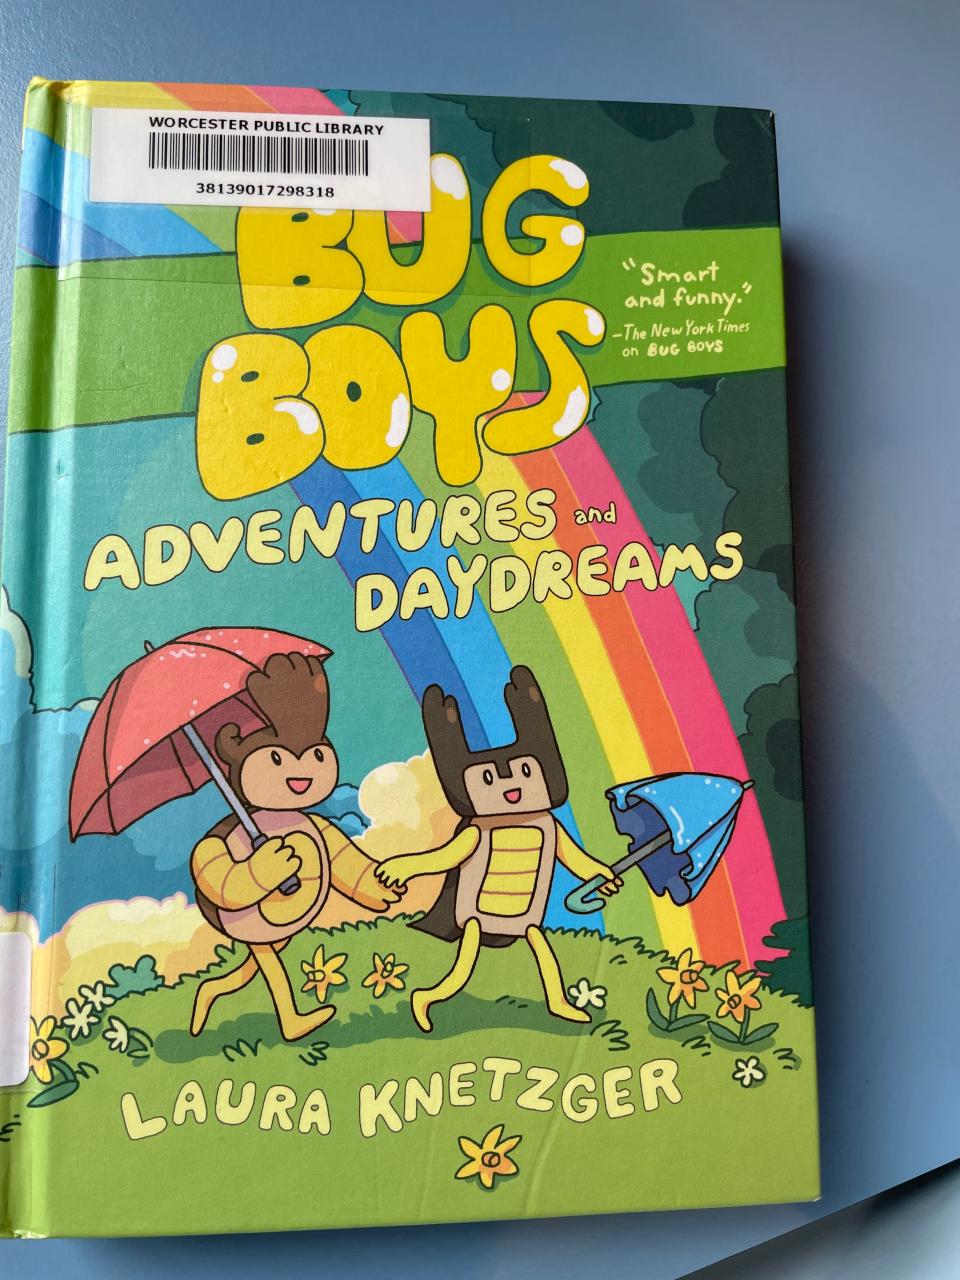 "Bug Boys: Adventures and Daydreams" by Laura Knetzger